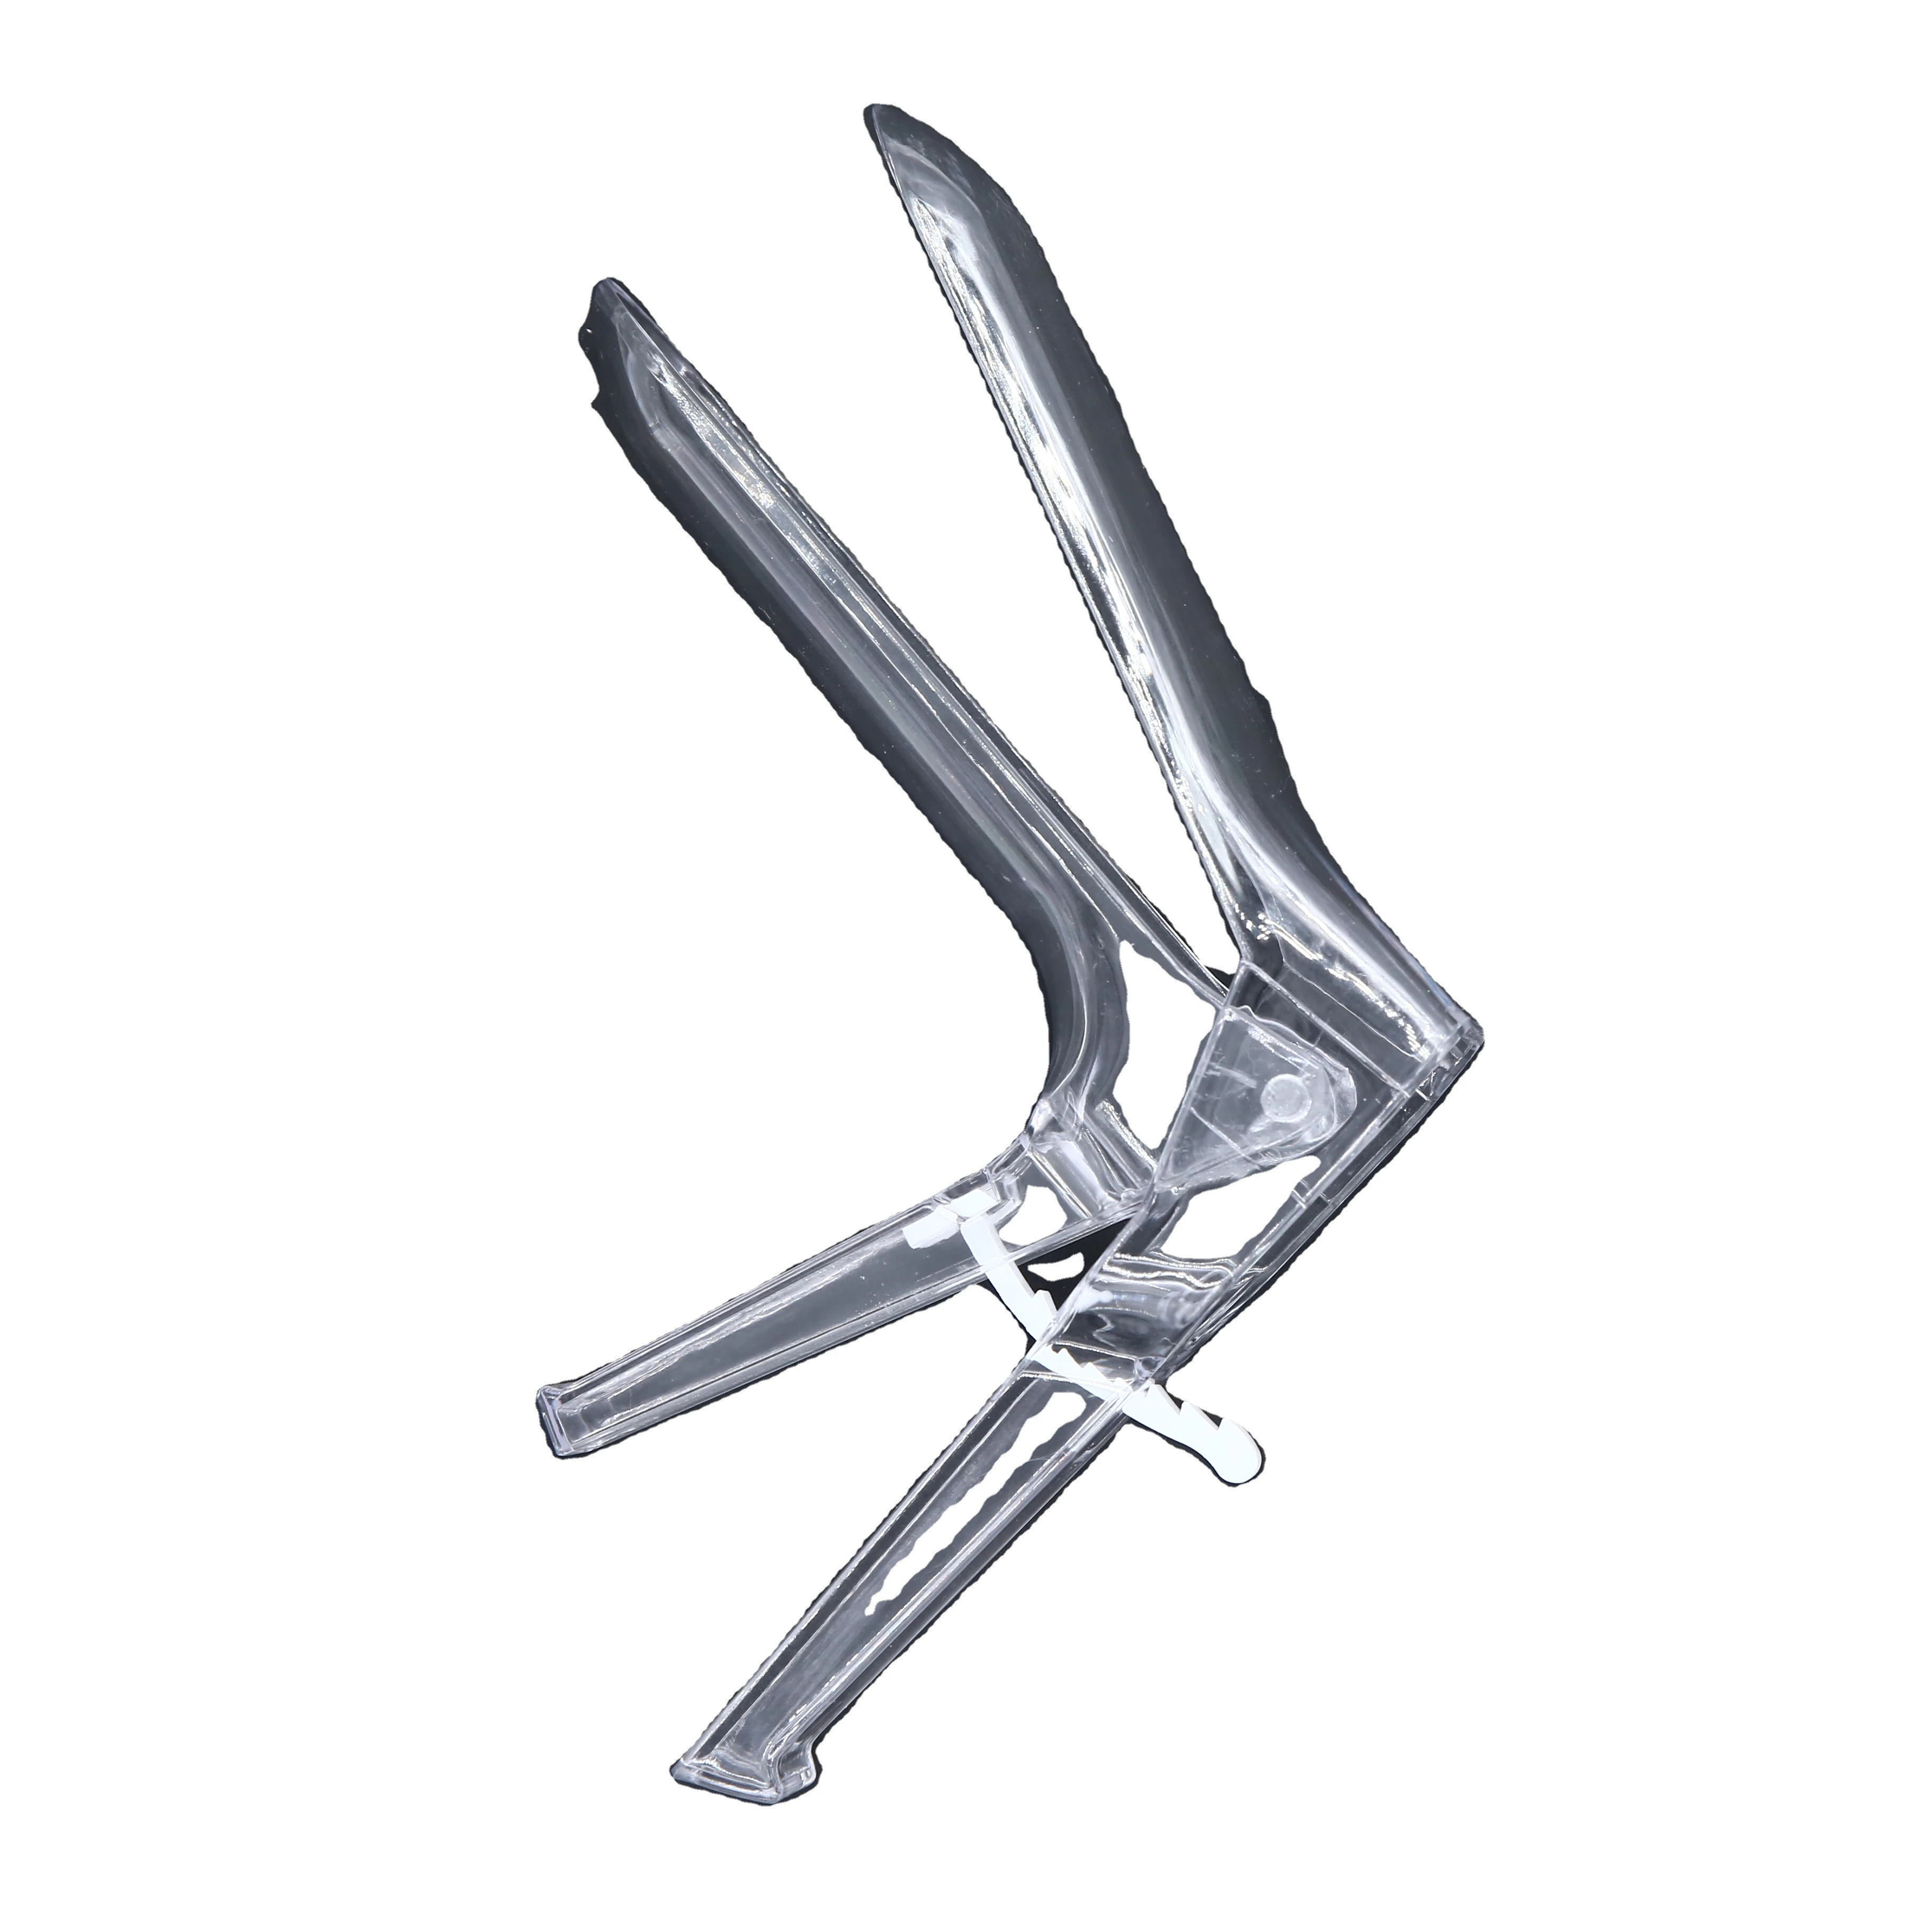 Low-cost disposable medical detection device colposcopy vaginal dilator